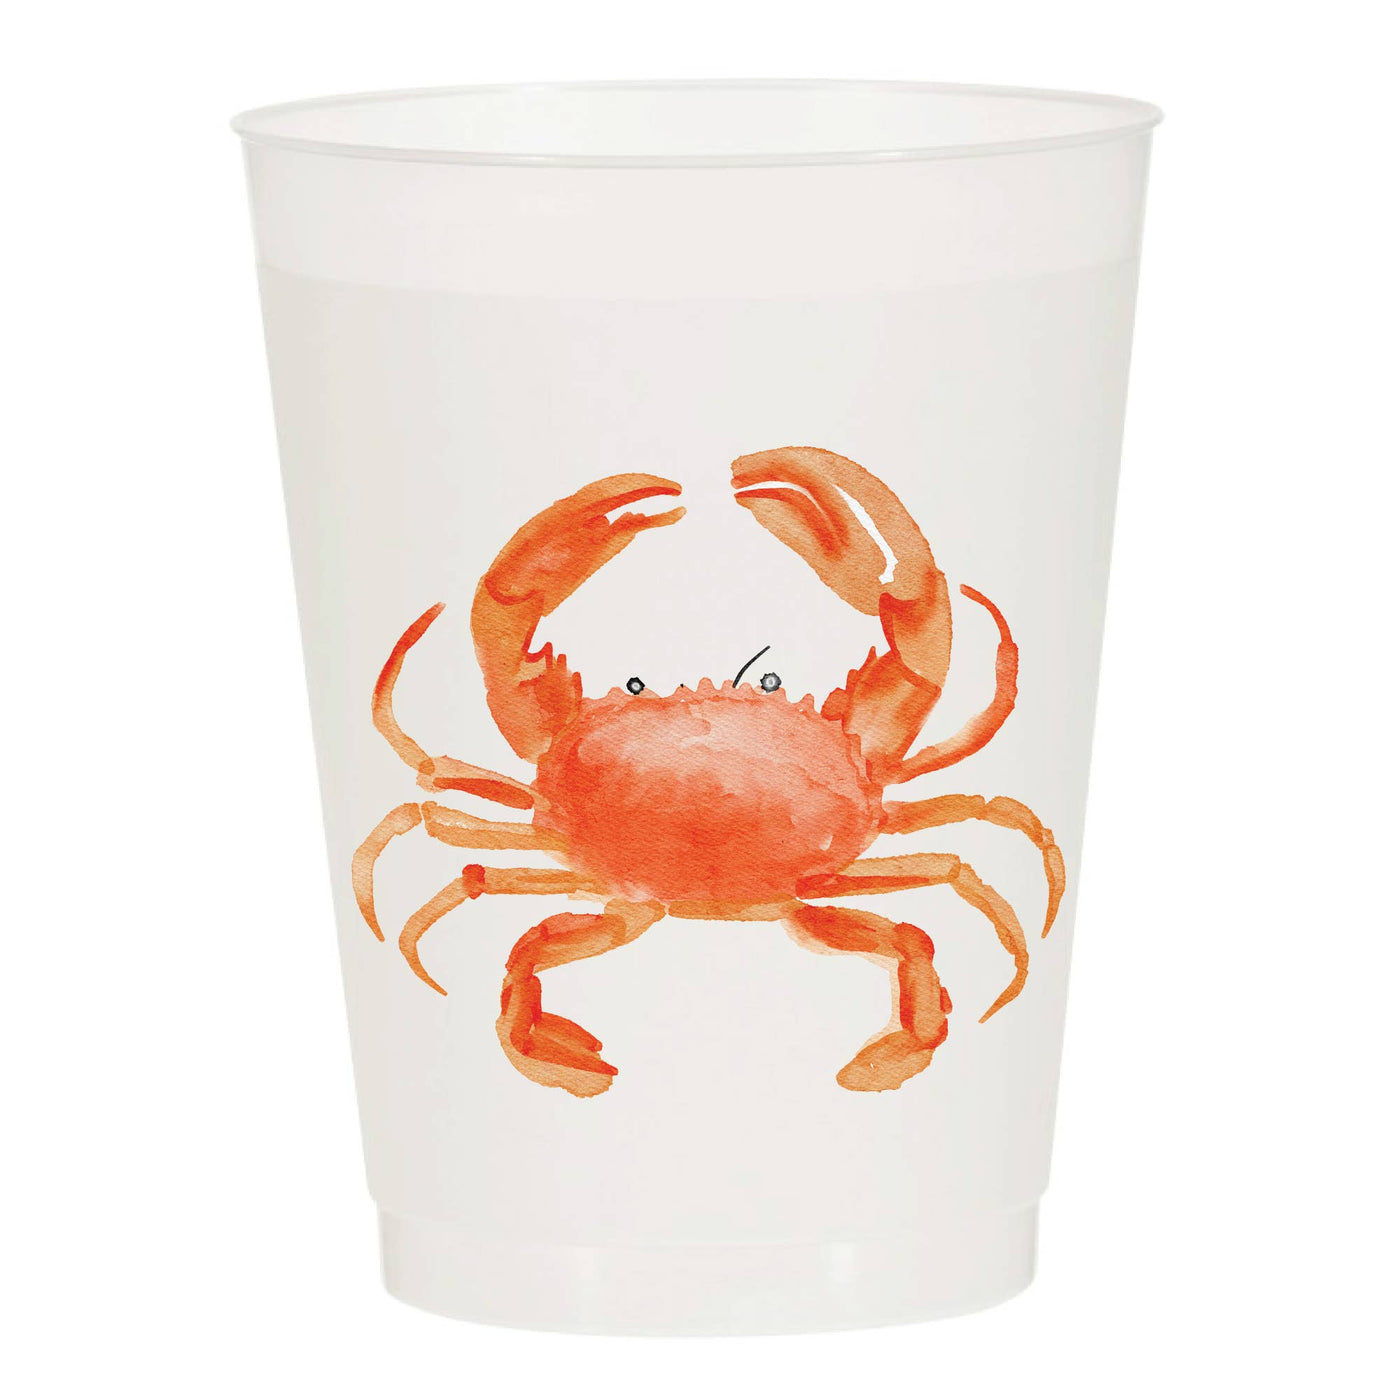 Stone Crab Reusable Cups - Set of 10